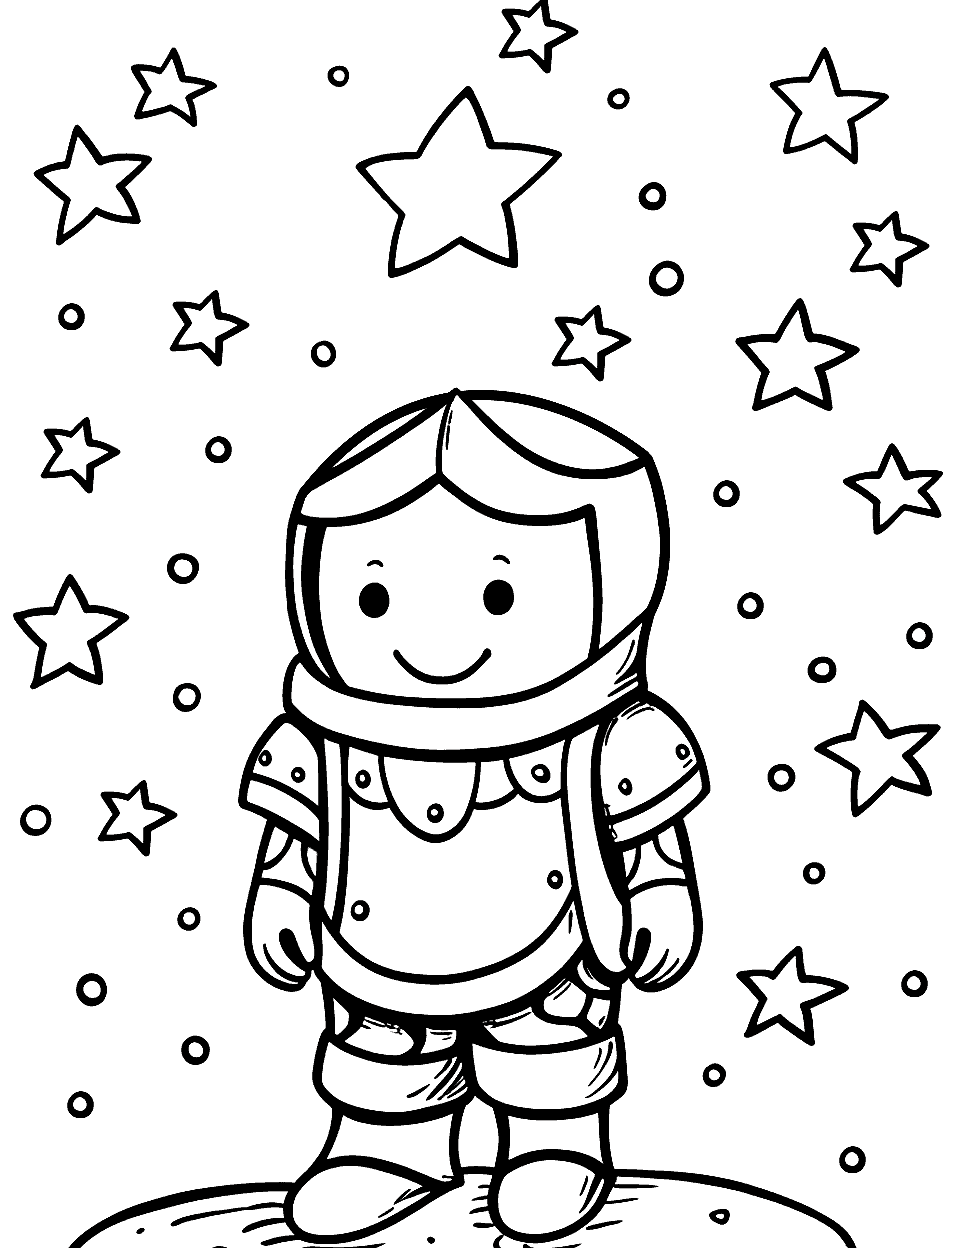 Starry Knight Star Coloring Page - A knight in armor under a starry sky.